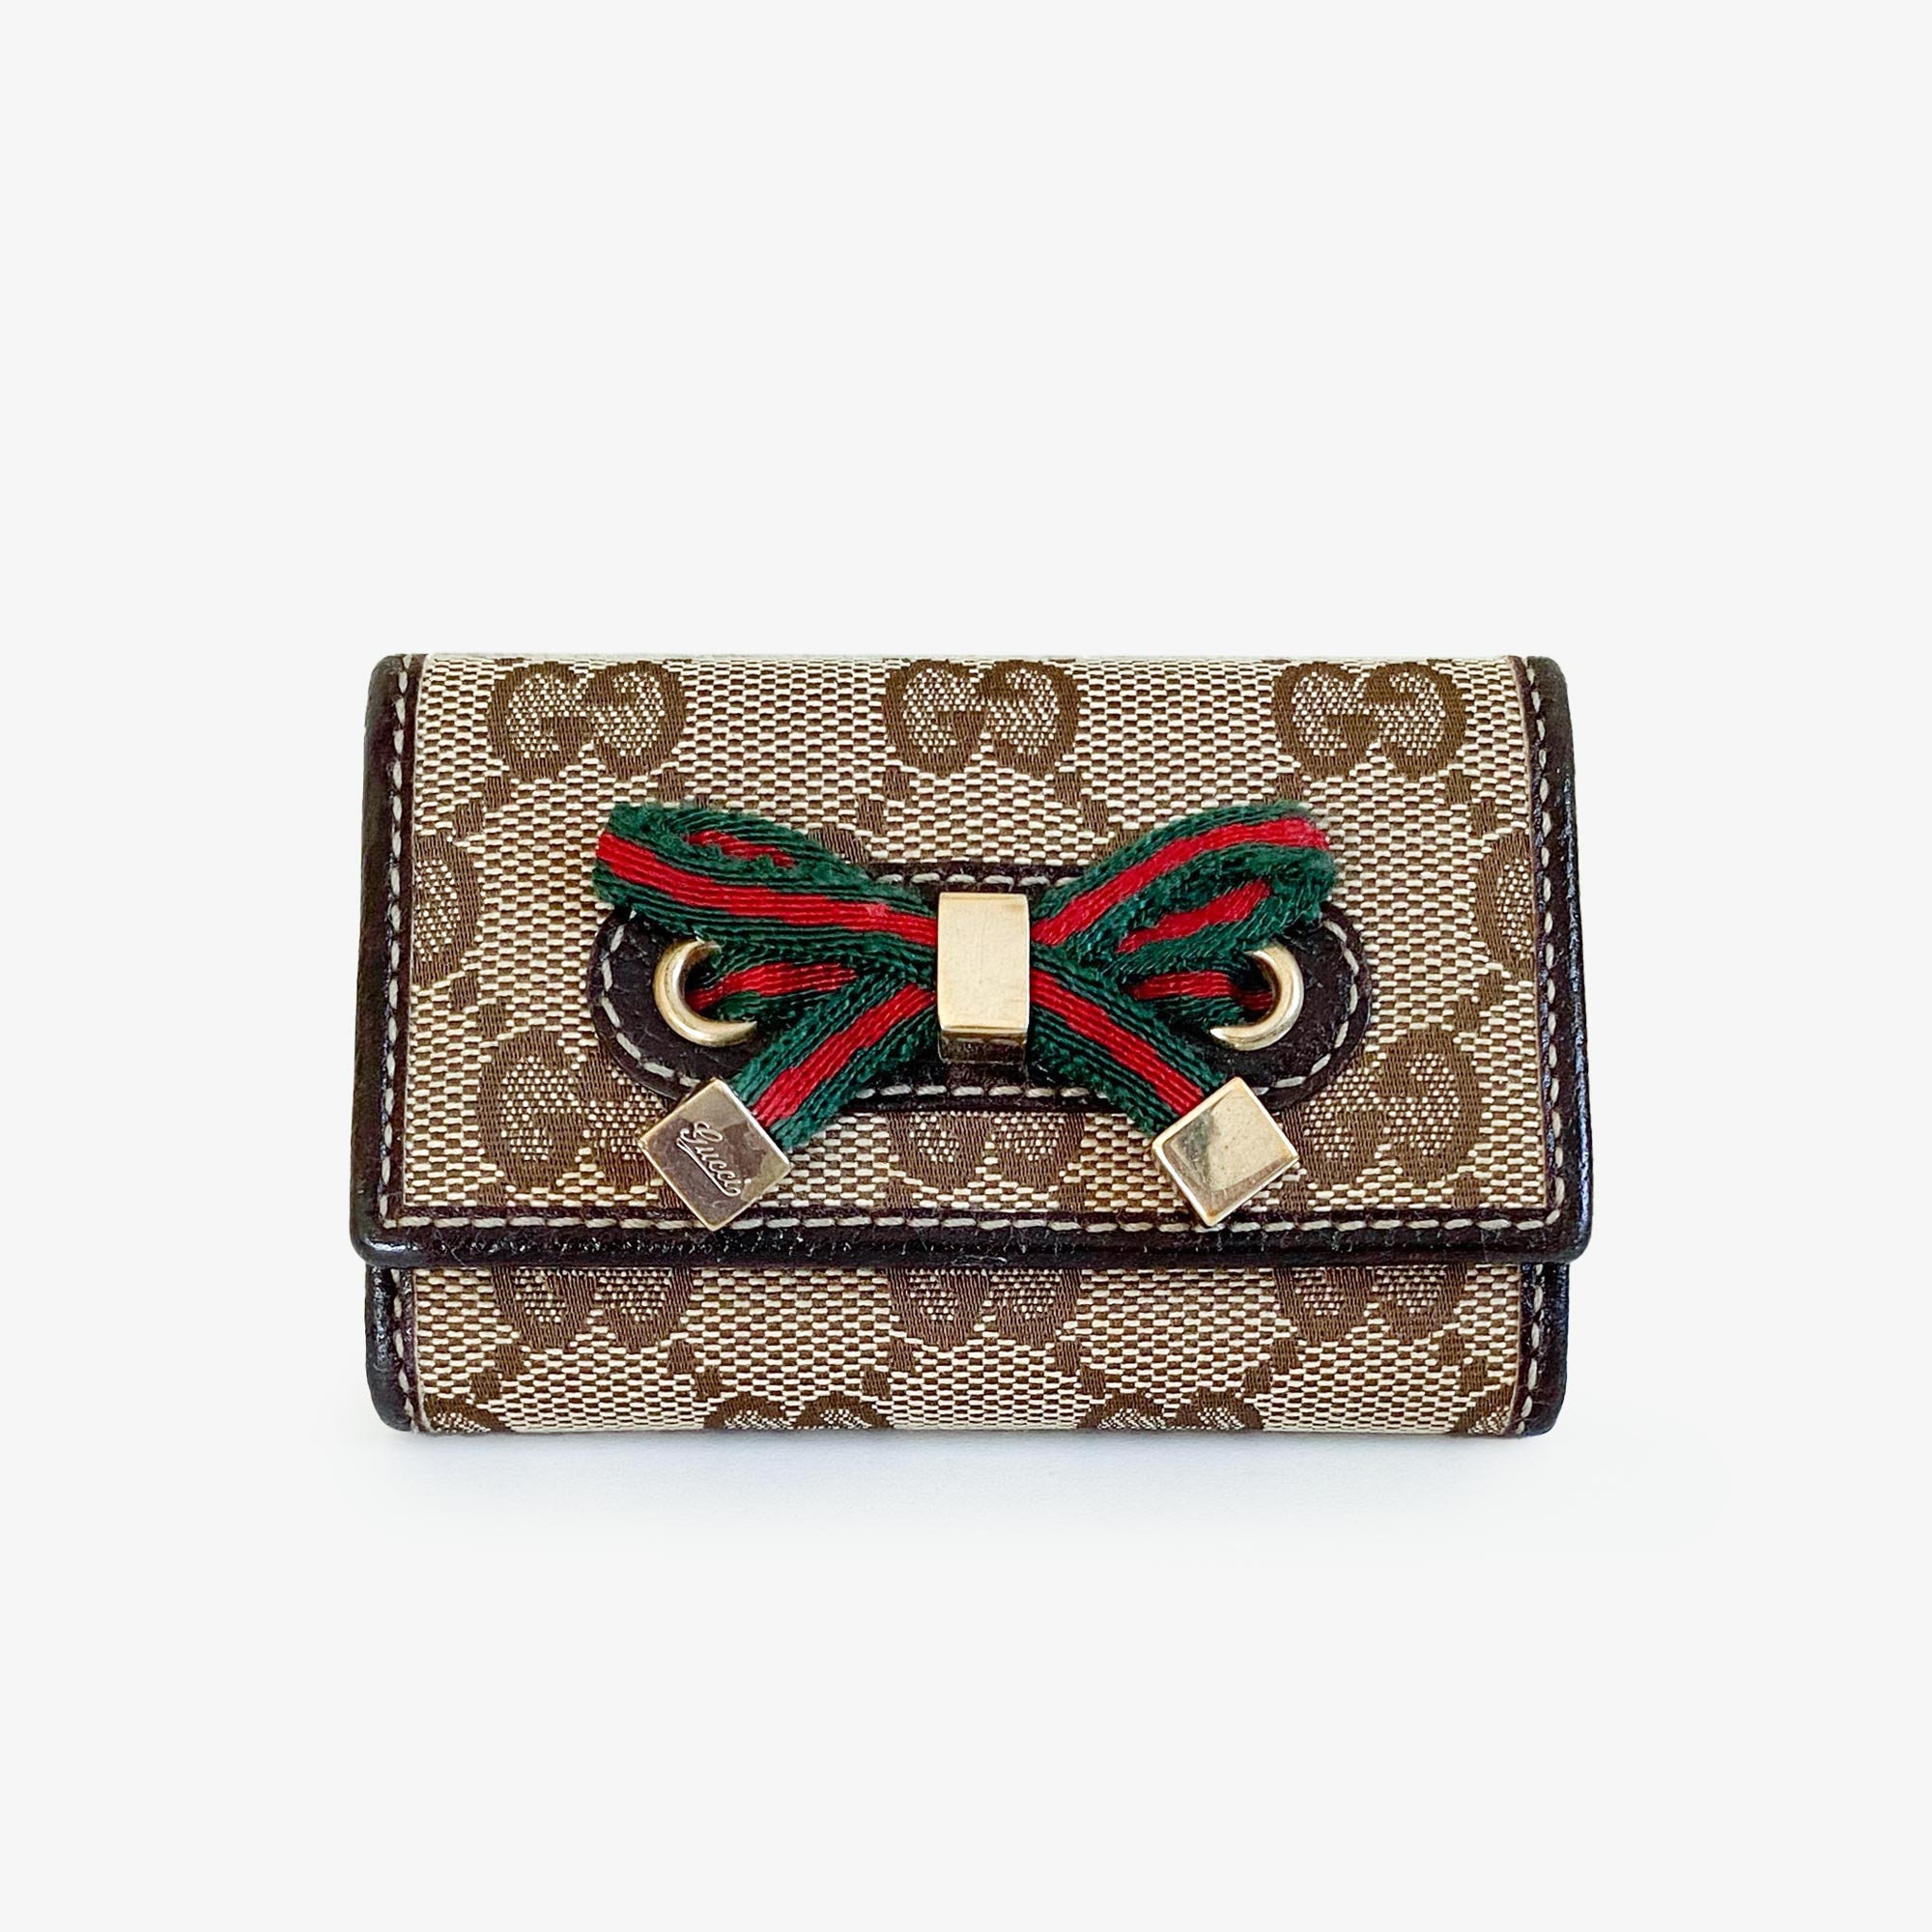 Gucci, Cell Phones & Accessories, Gucci Gg Supreme Canvas Iphone Case  With Card Slot Box New Authentic